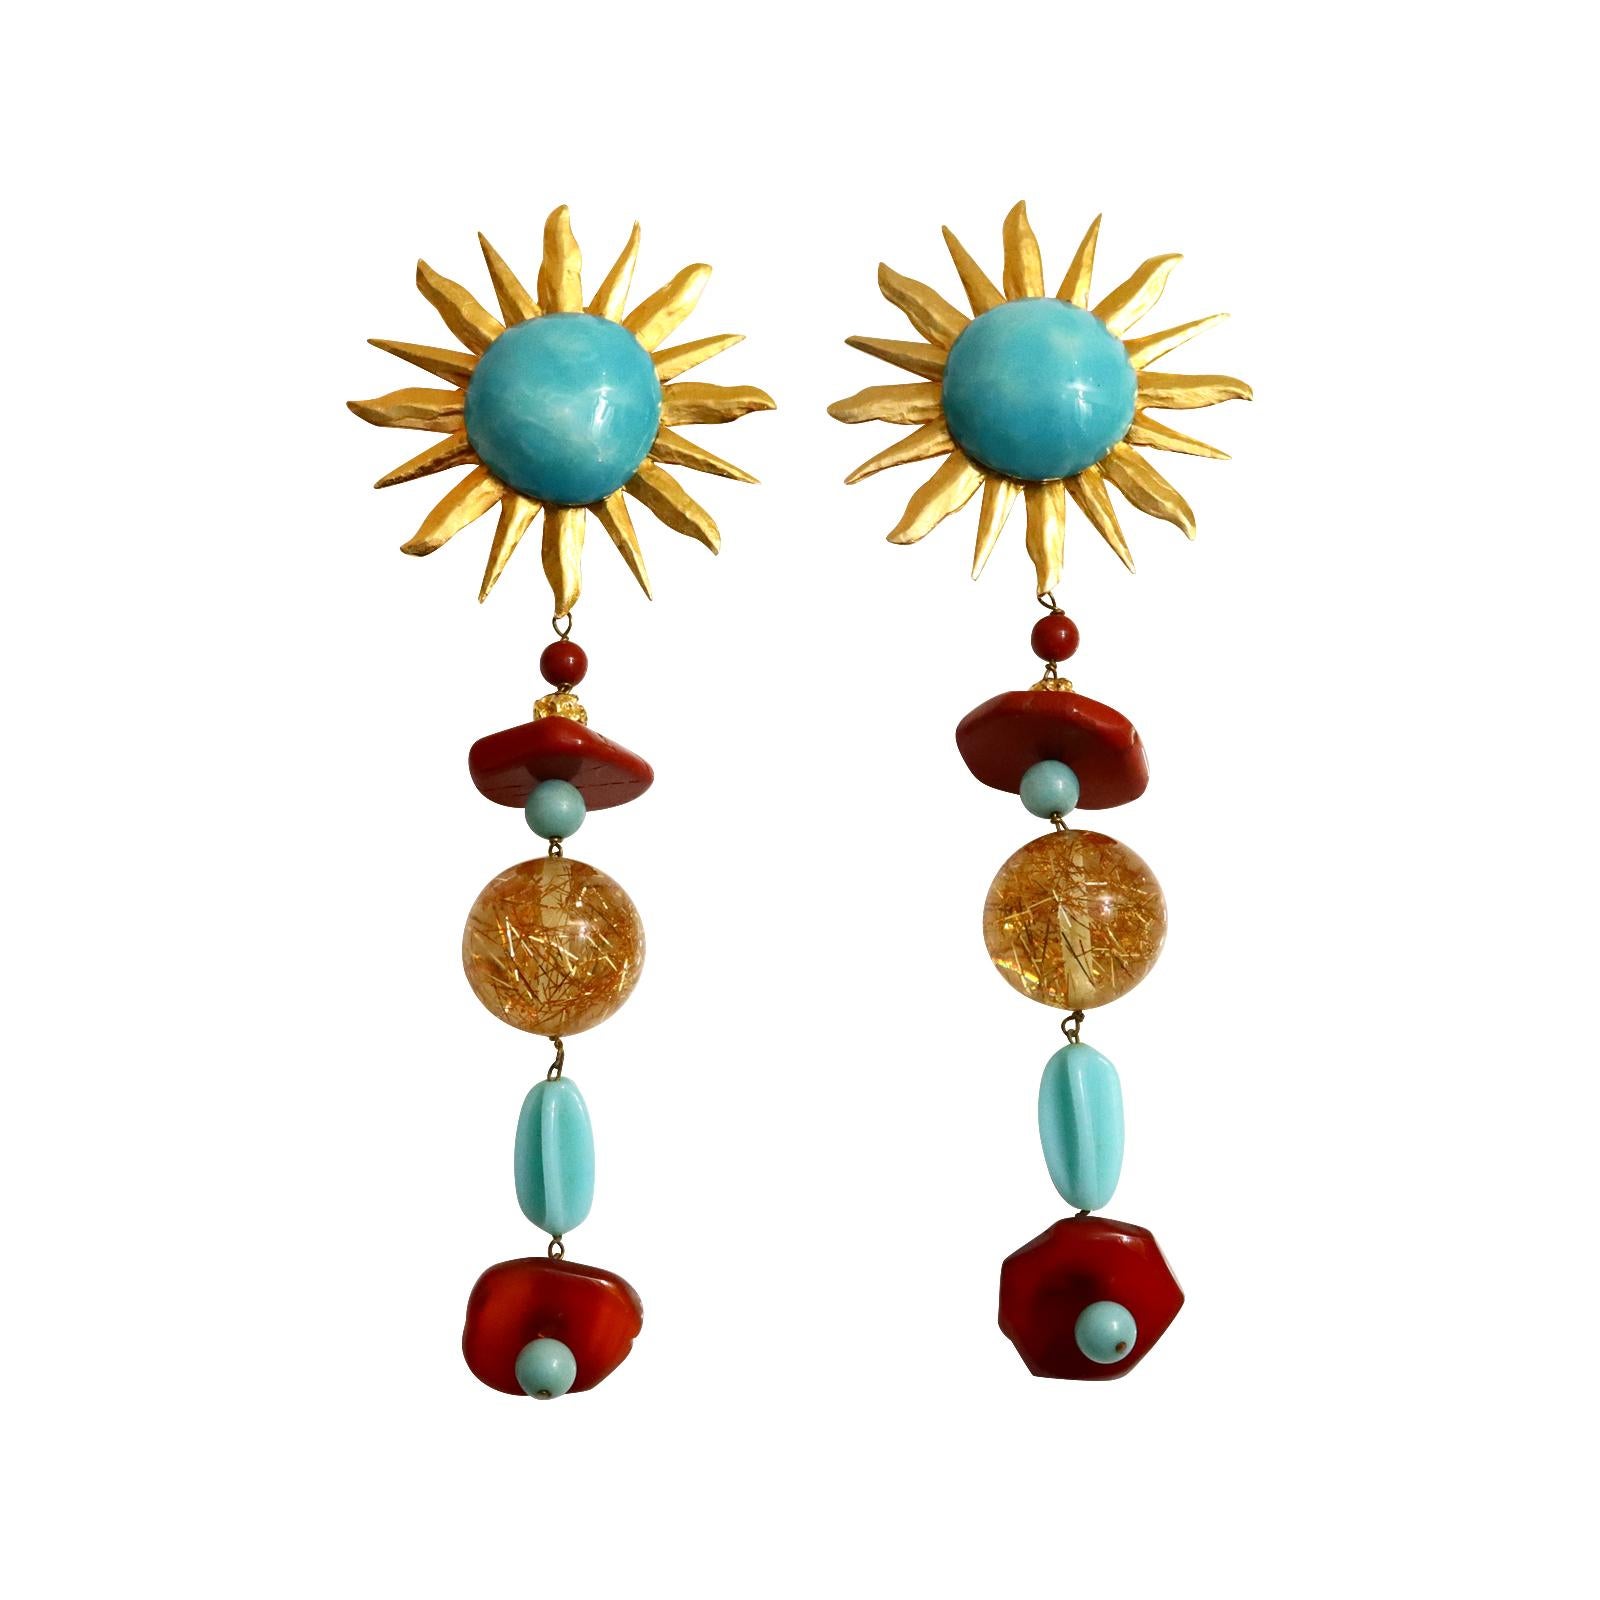 Vintage Yves Saint Laurent YSL Sun Burst Long Dangling Earrings Circa 1980s. These have Faux turquoise, amber, gold beads, quartz beads.  These were created for the YSL defile runway.  They are not signed but have the plaque.  These will make you